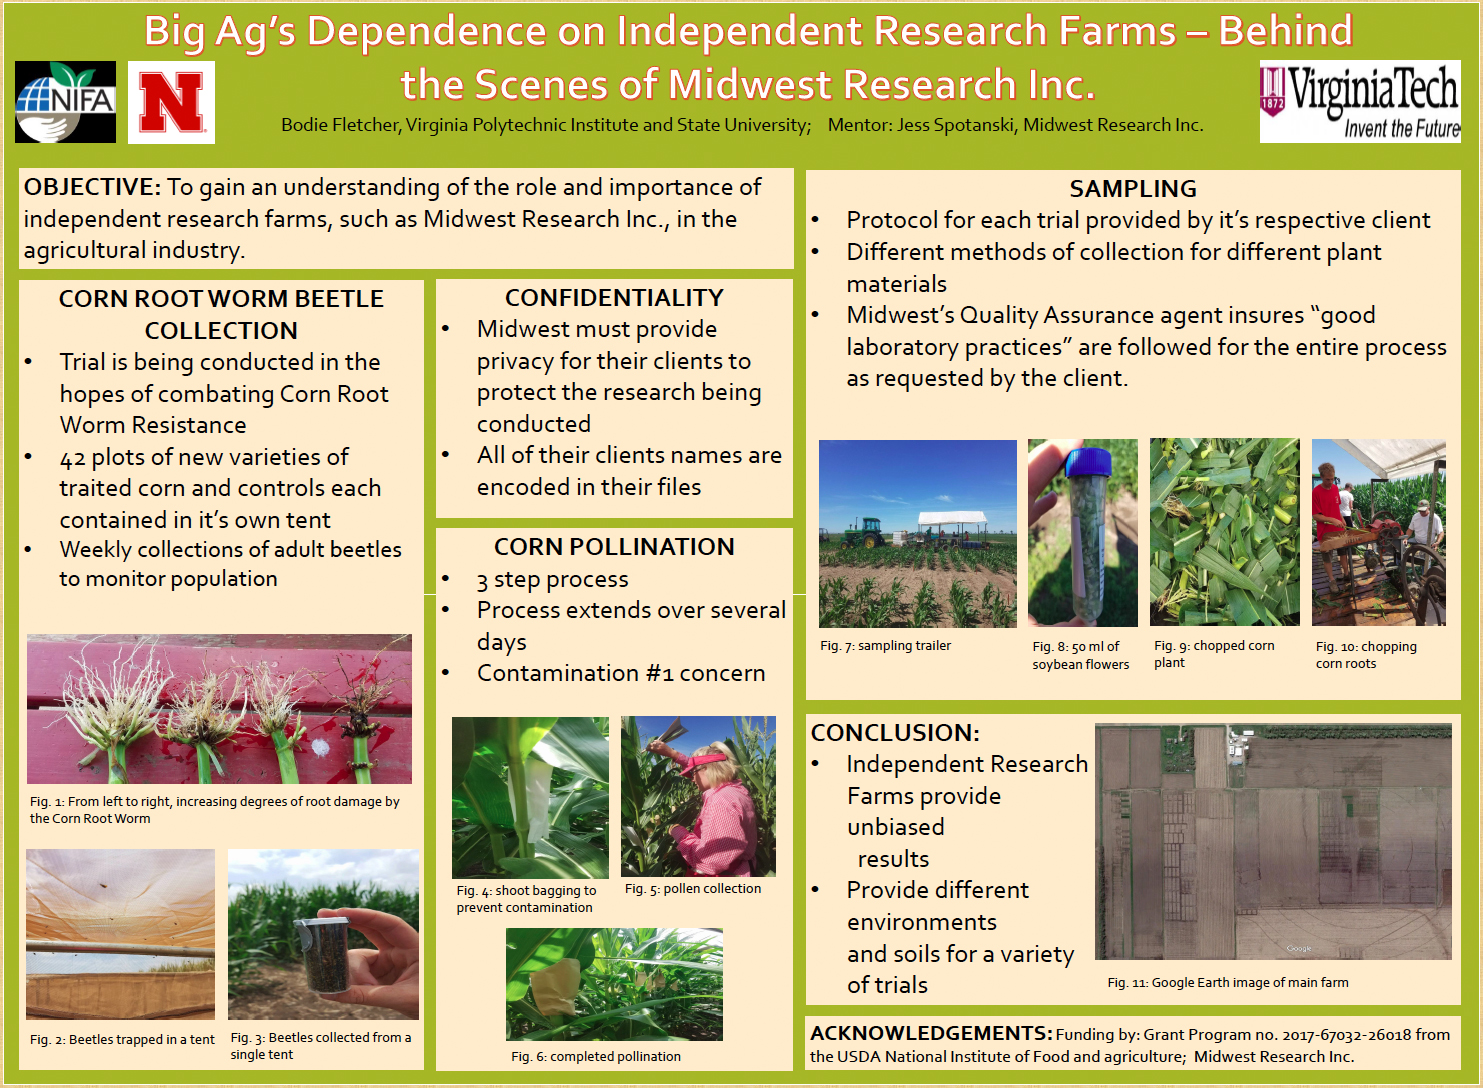 Big Ag’s Dependence on Independent Research Farms poster